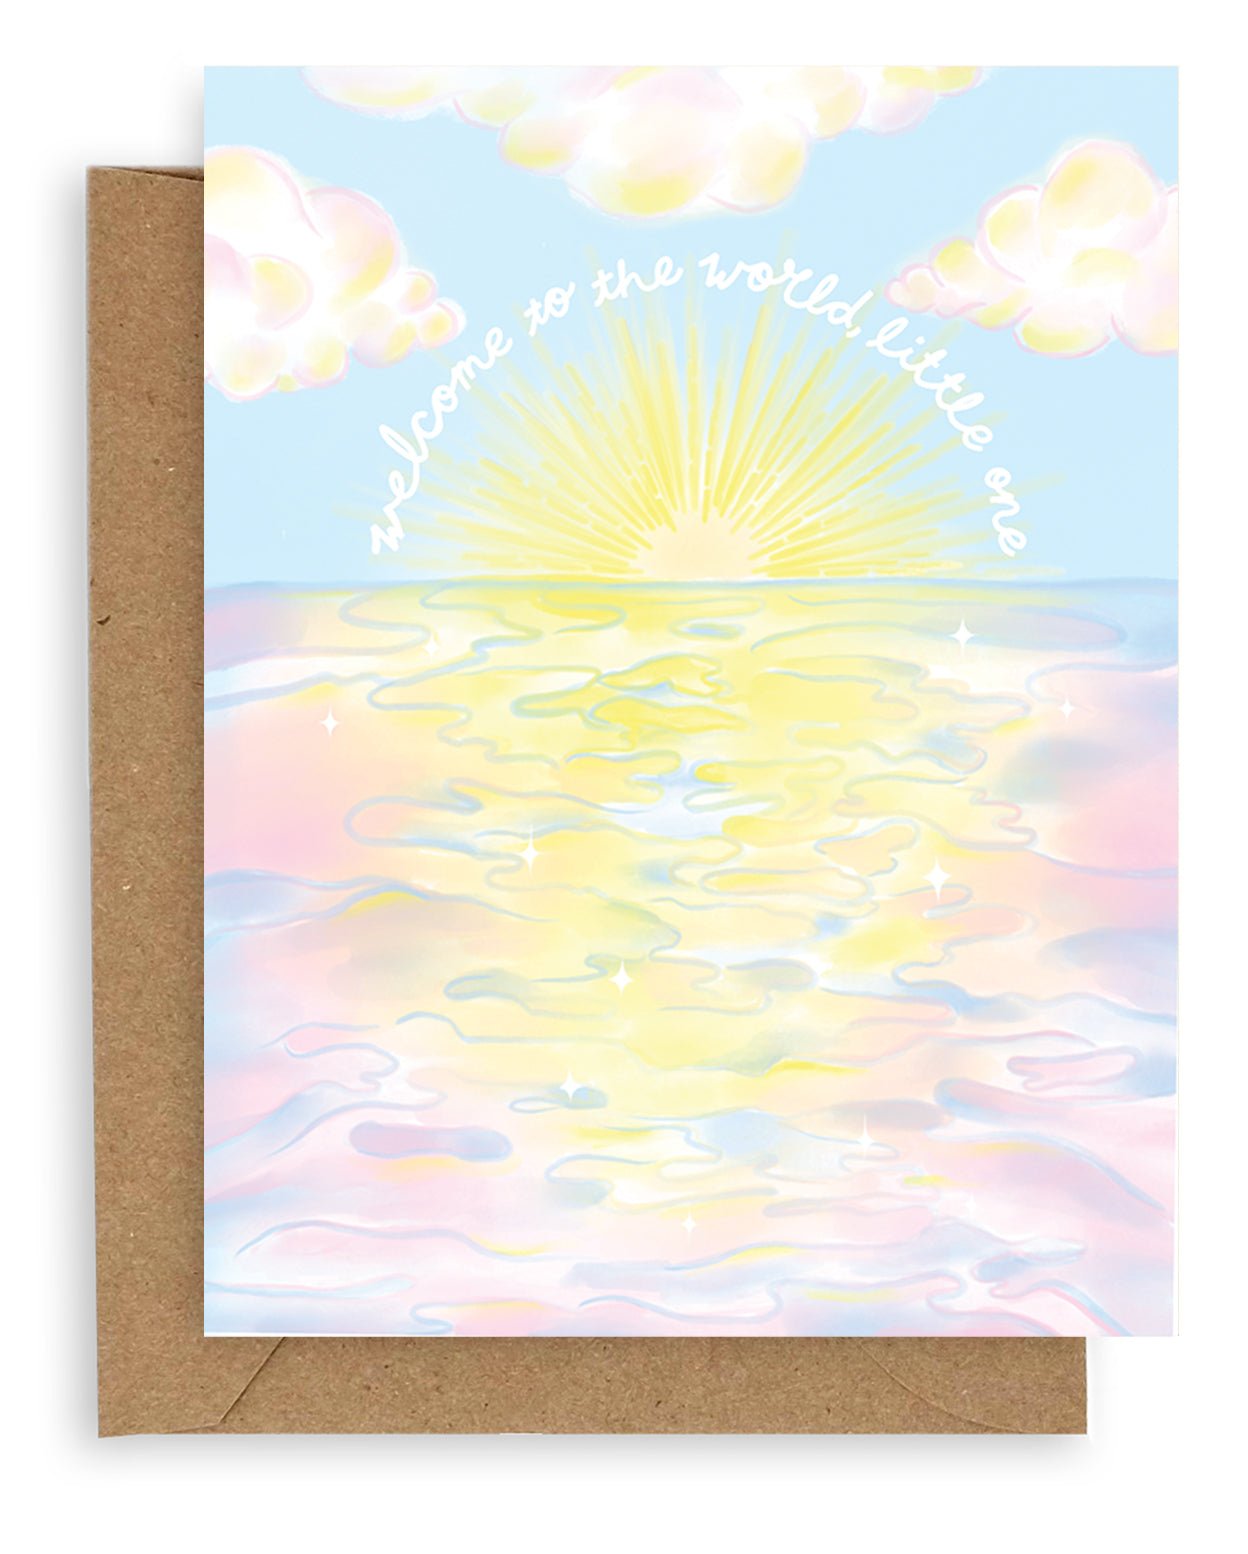 &quot;Welcome To The World Little One&quot; printed in white cursive font bending around a sunset over the ocean with a pink and blue cloudy landscape design printed on cardstock resting on a kraft envelope.